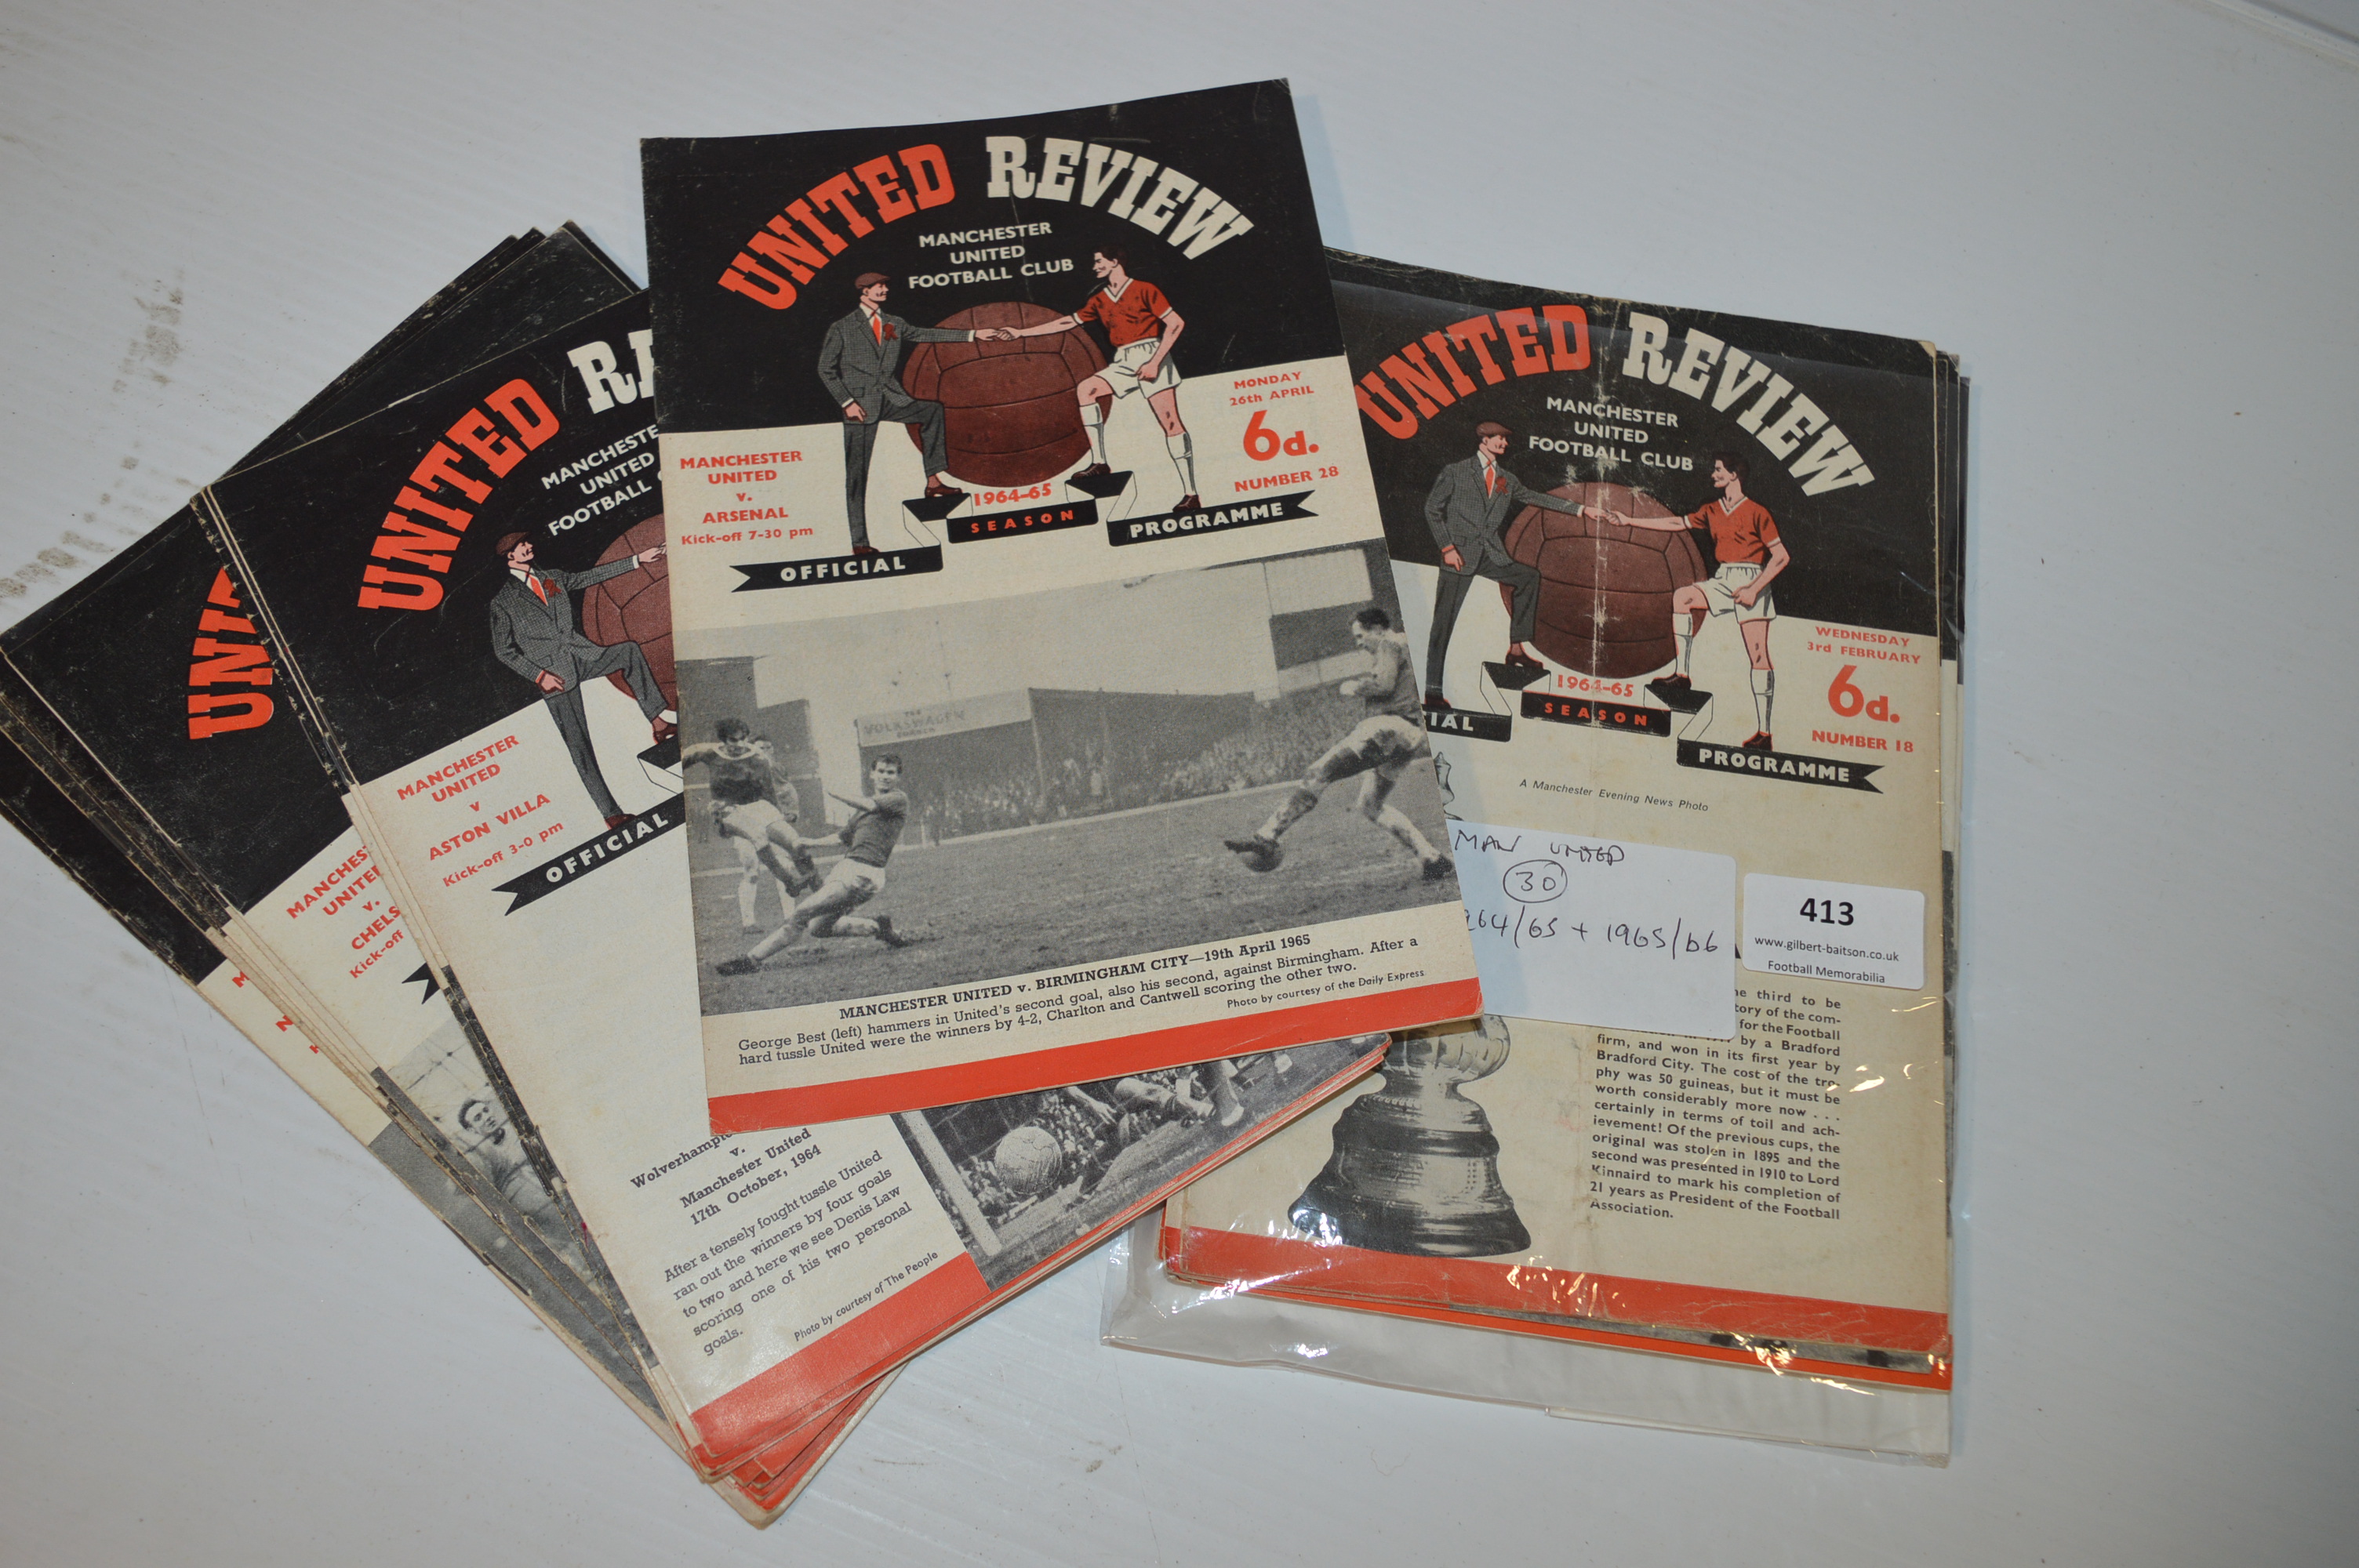 Thirty Manchester United Programmes from 1964-65 and 1965-66 Seasons